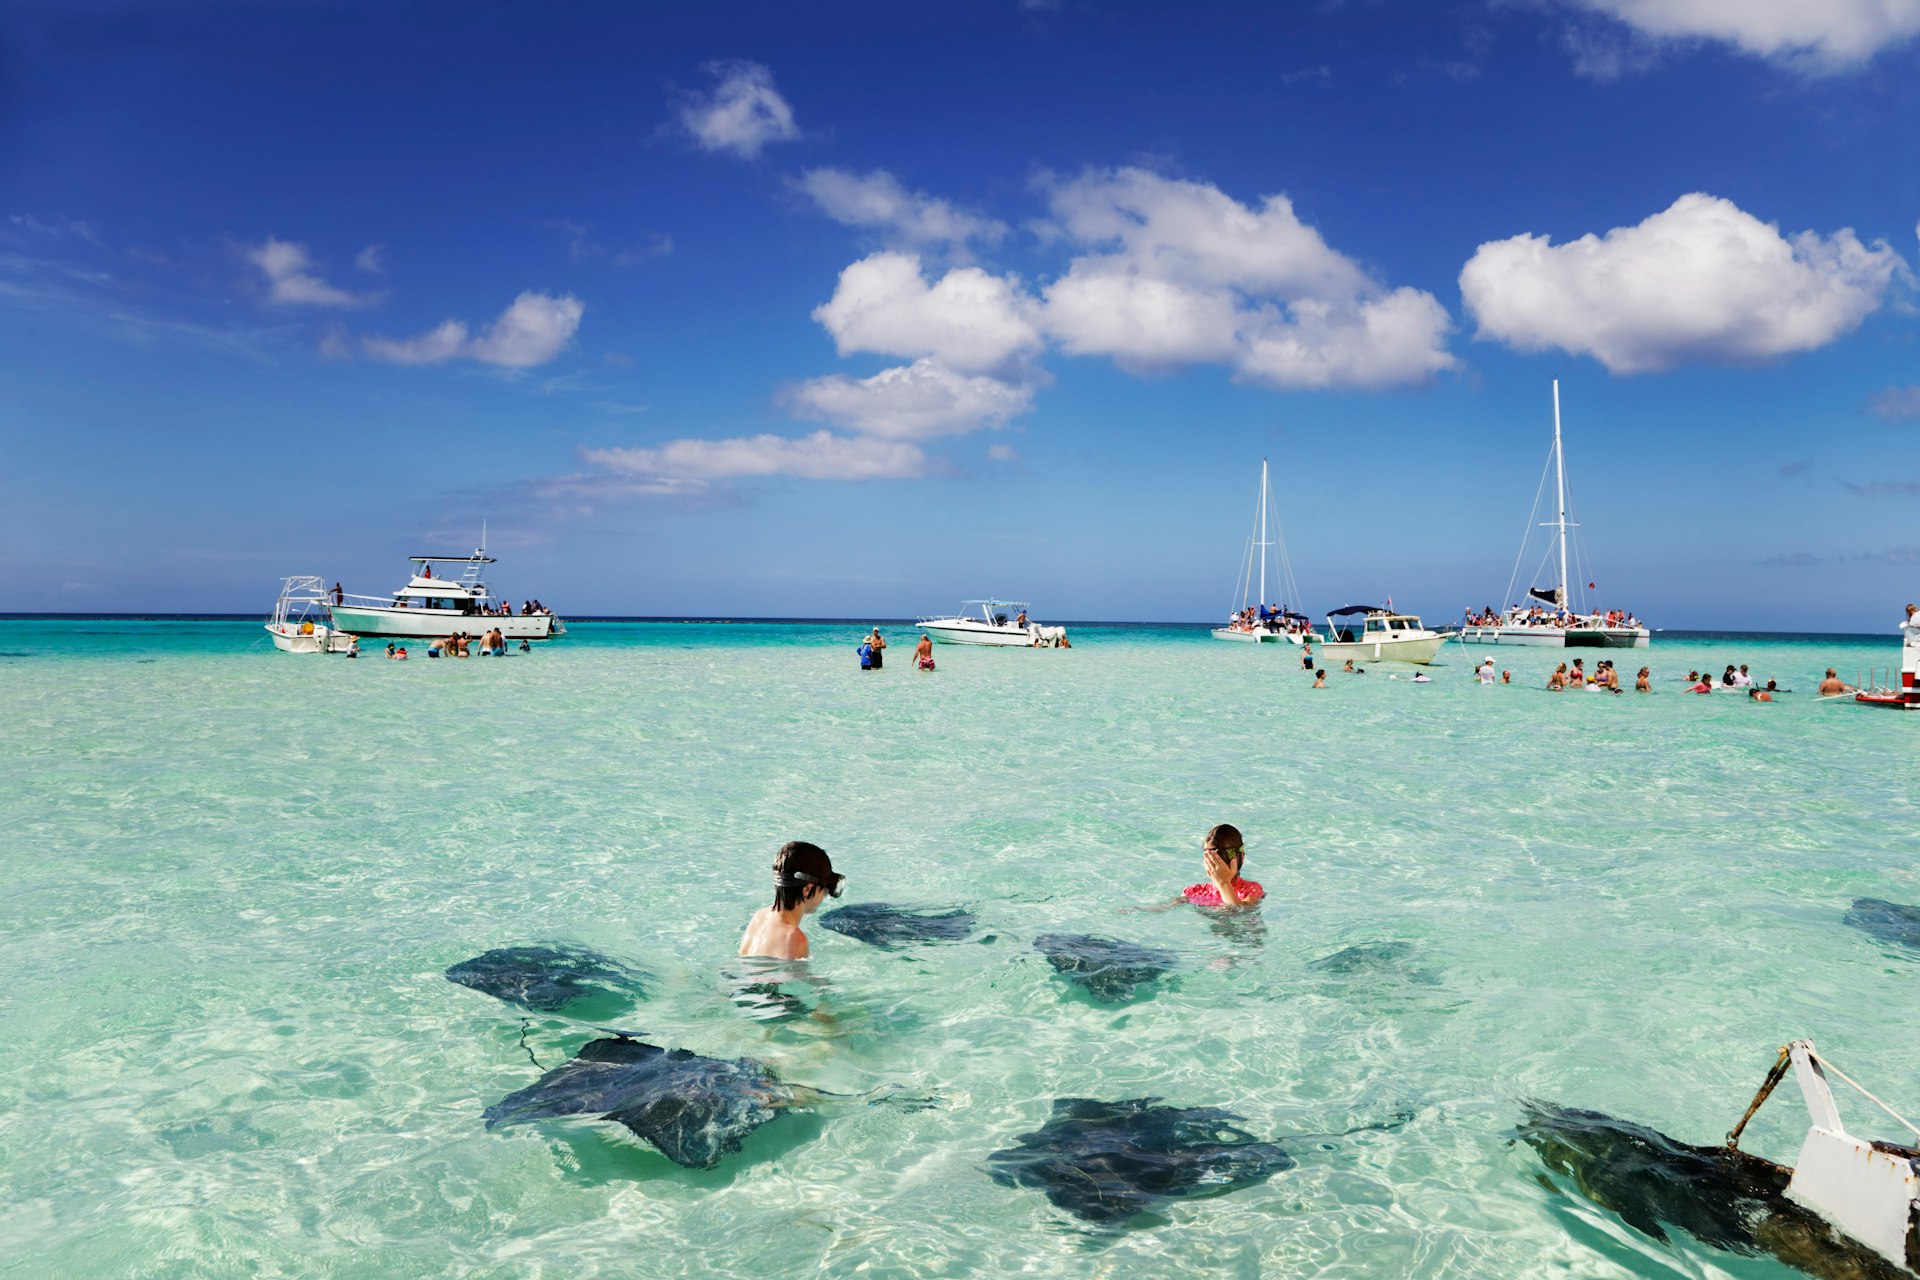 Two snorkelers pictured swimming with stingrays and sailboats in the distance in Stingray City, Grand Cayman